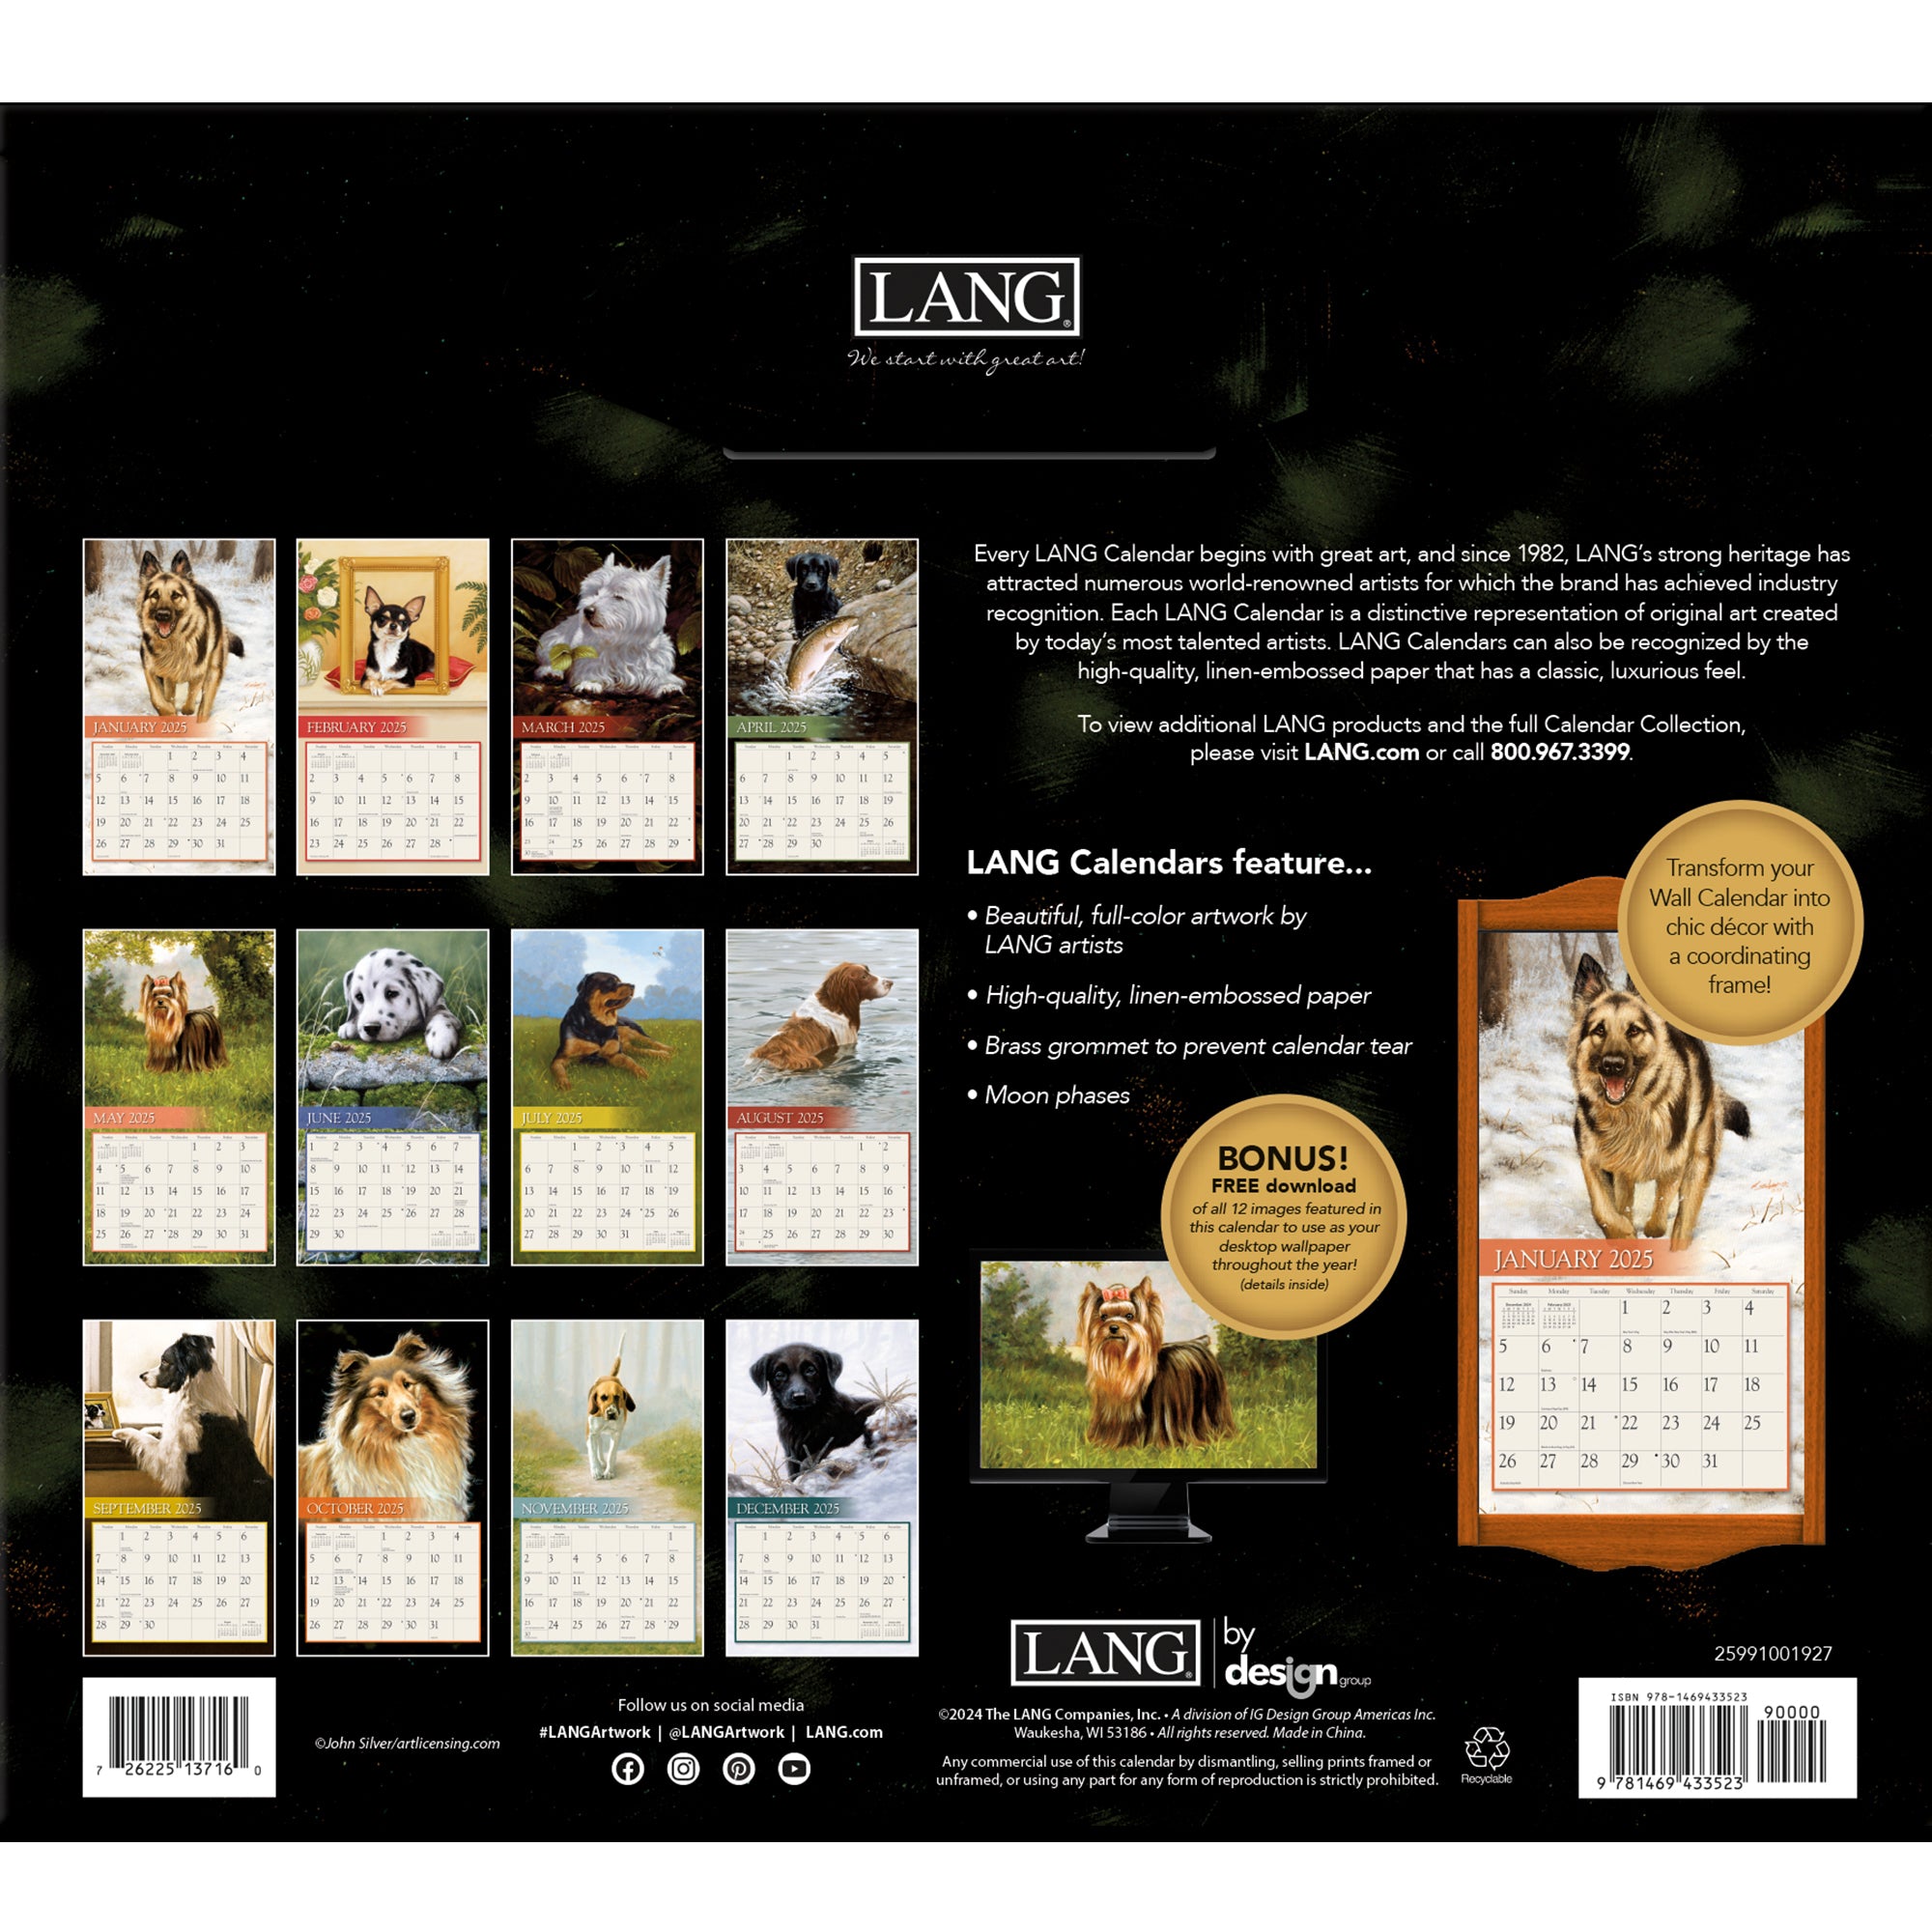 2025 Love Of Dogs By John Silver - LANG Deluxe Wall Calendar